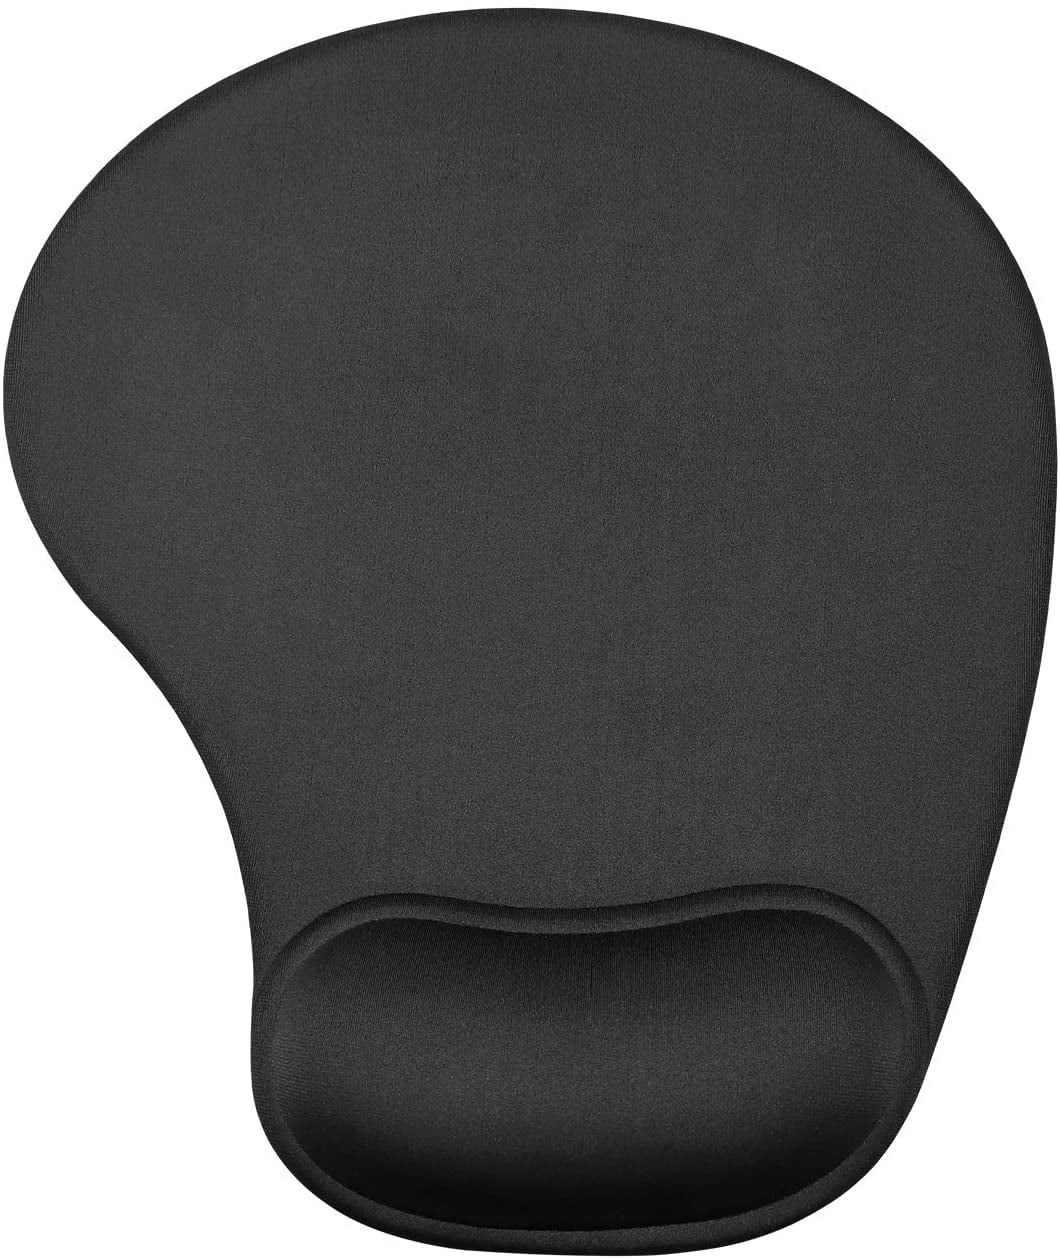 Gel Mouse Pad with Rests (Green, Pack) - Walmart.com